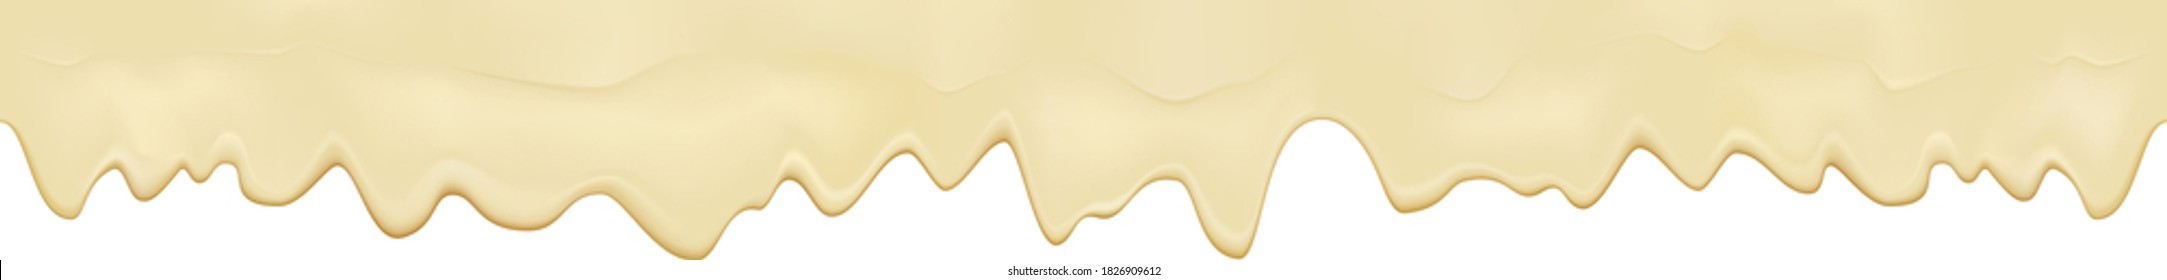 Liquid Melted Cheese White Seamless Texture. Mayonnaise Texture Isolated On White Background. Cream Pouring Border. Vector Realistic Illustration.